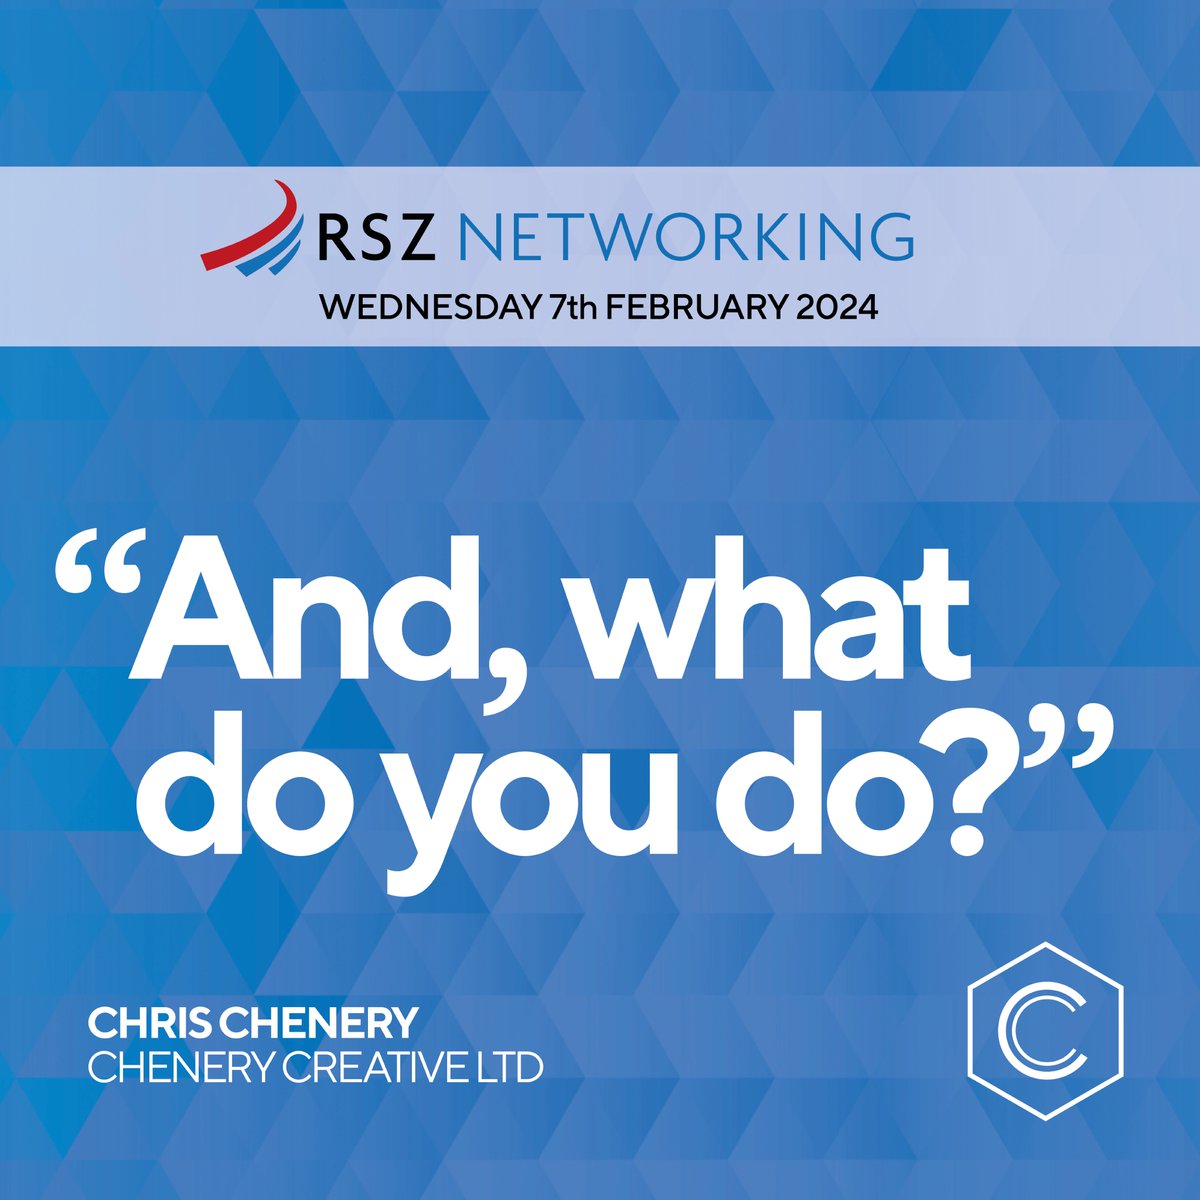 Creative Director, Chris Chenery is speaking at RSZ Networking breakfast tomorrow morning: 'And, what do you do?' - hopefully those that have got tickets will gain at least something to think about from it. 

#rsznetworking #networkingevent #networkinggroup #buildingrelationships